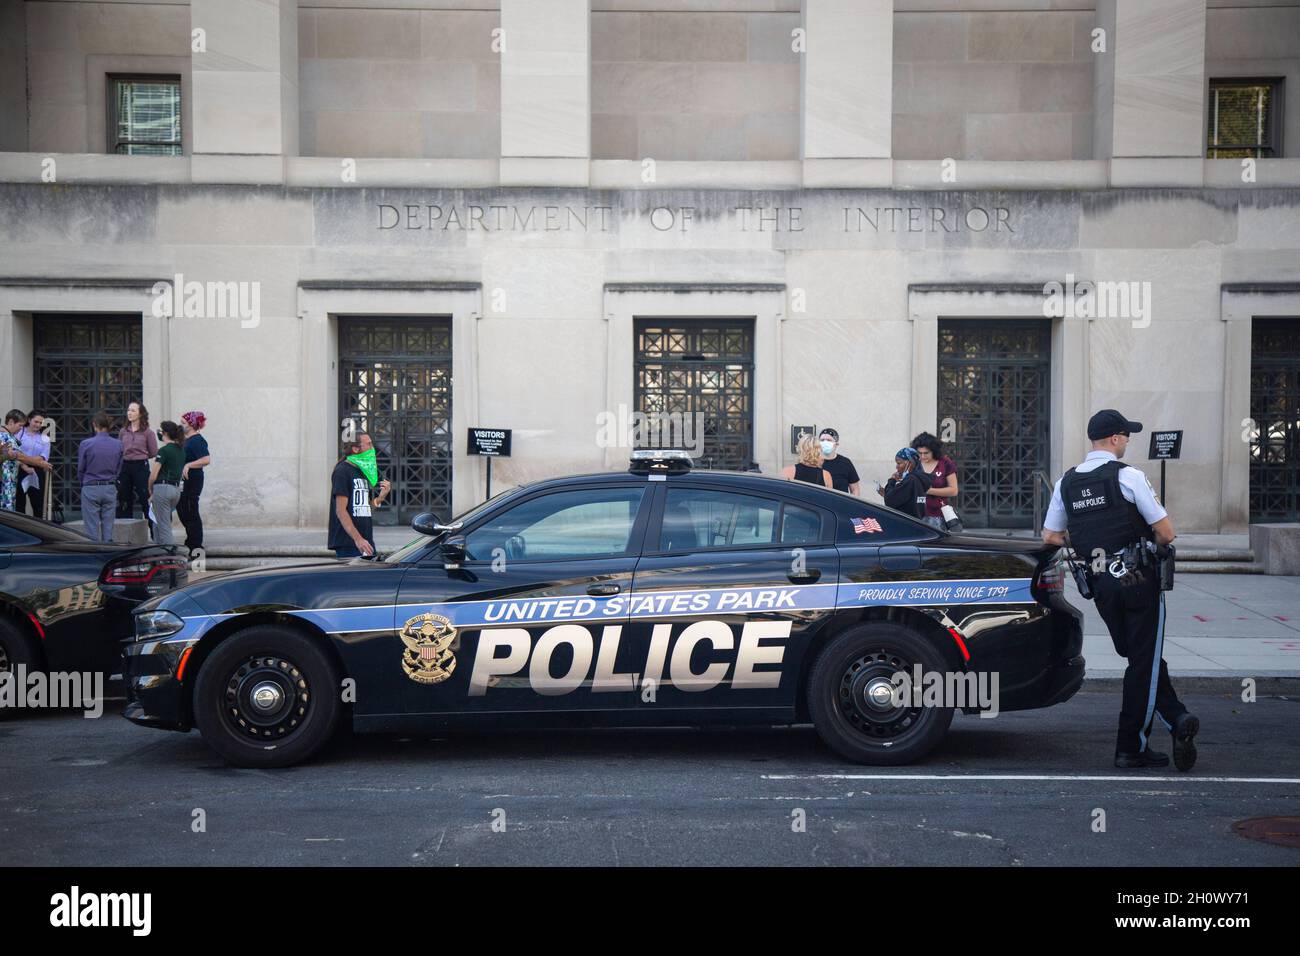 Washington, United States. 14th Oct, 2021. Police officer stands alert by a car during the demonstration. Environmental activists arrested after occupying the Bureau of Indian Affairs at the Department of Interior. Credit: SOPA Images Limited/Alamy Live News Stock Photo